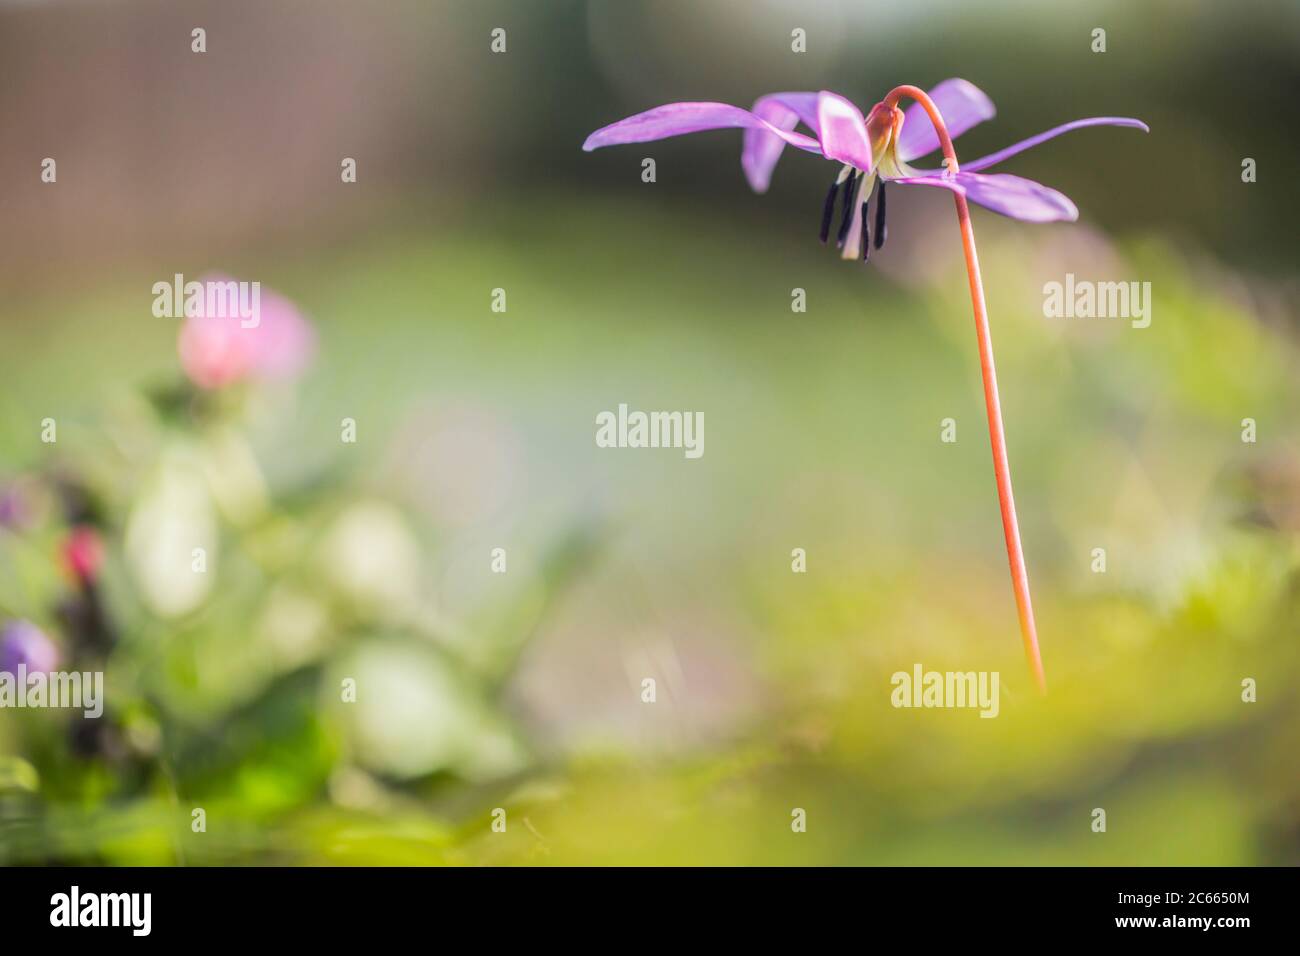 Flora of Europe. Plant and flowers. Stock Photo